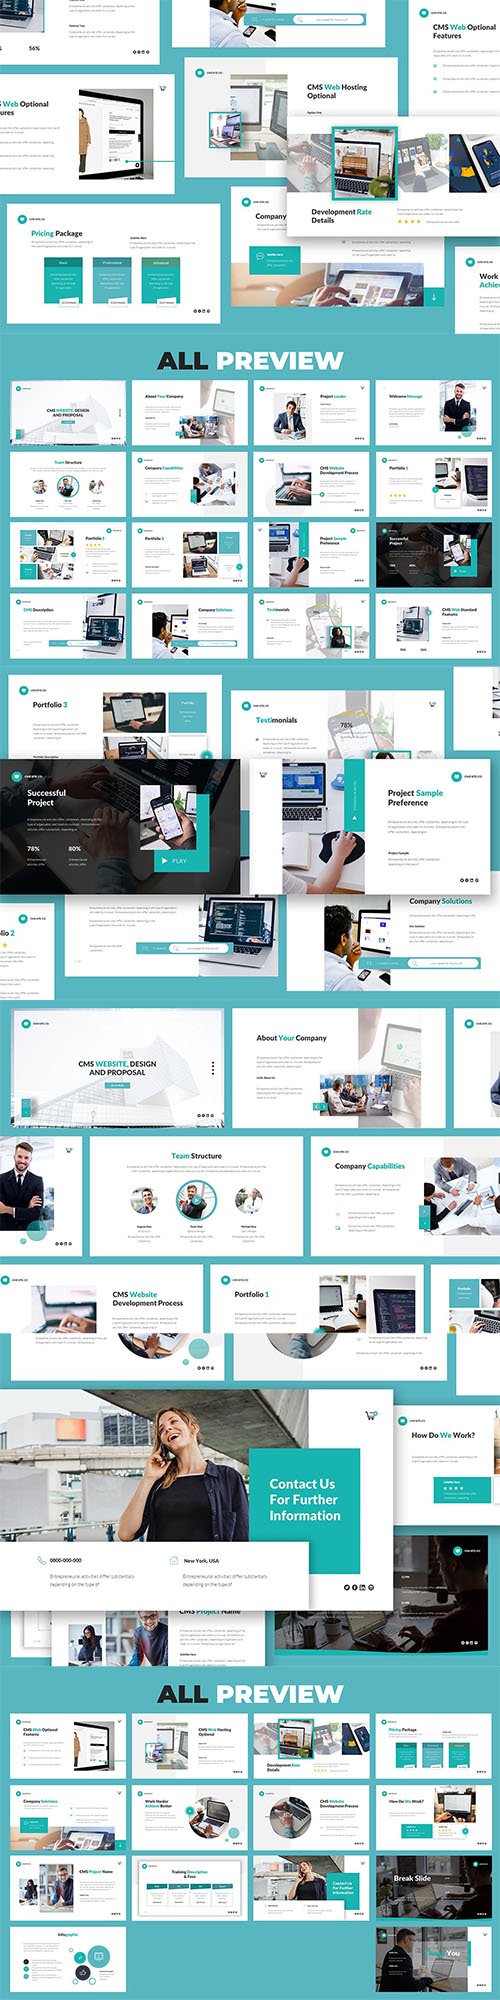 CMS Website Design And Proposal Powerpoint, Keynote and Google Slides Templates